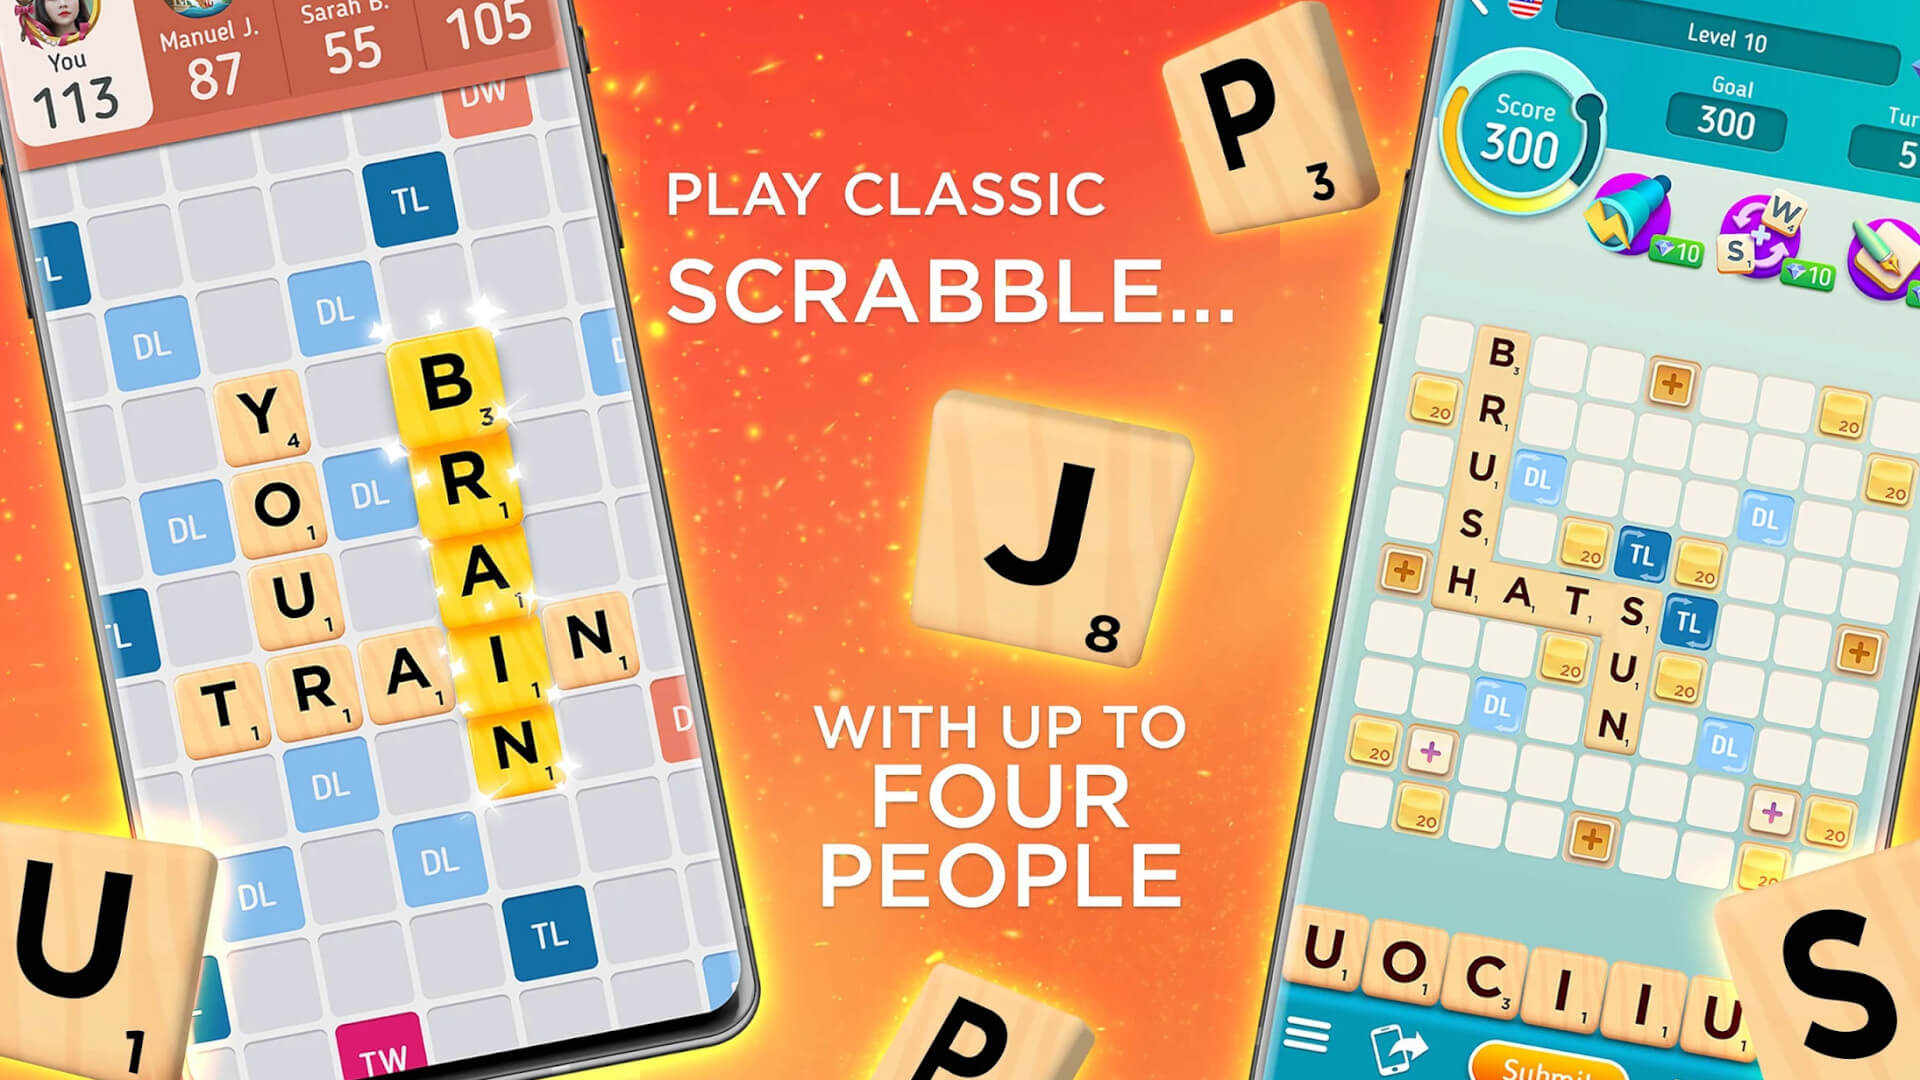 A banner ad showing Scrabble Go Classic